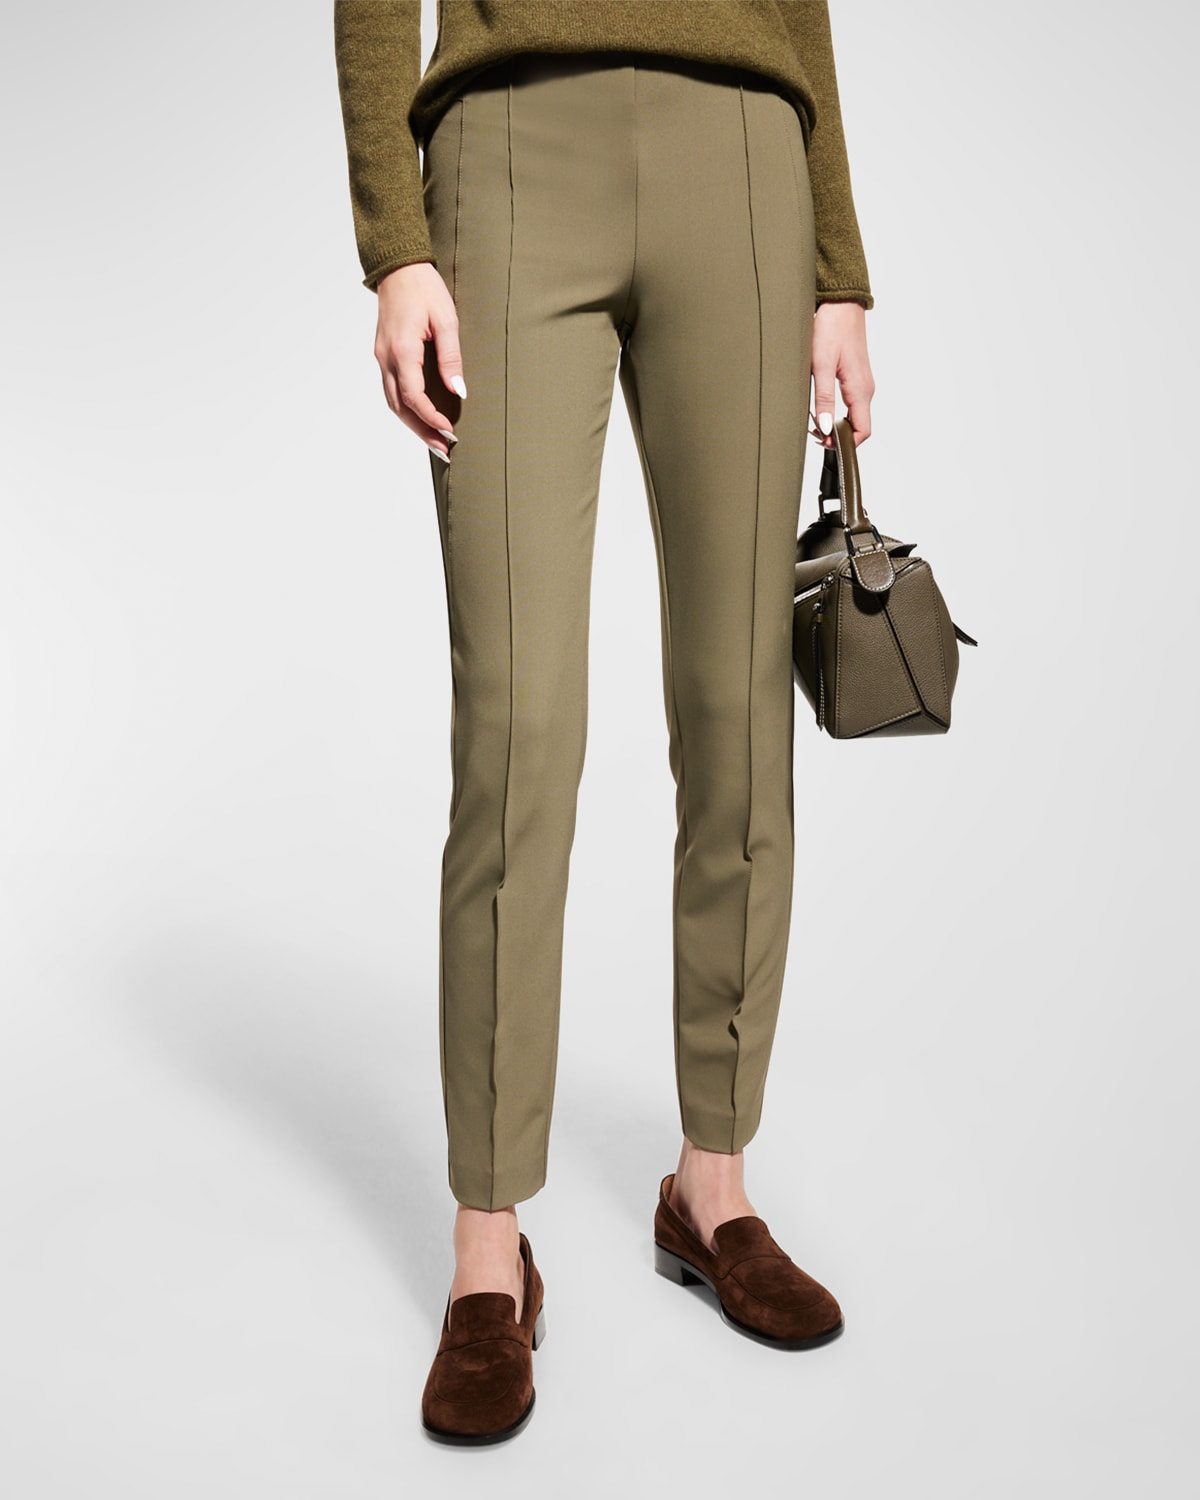 LAFAYETTE 148 GRAMERCY ACCLAIMED-STRETCH PANTS